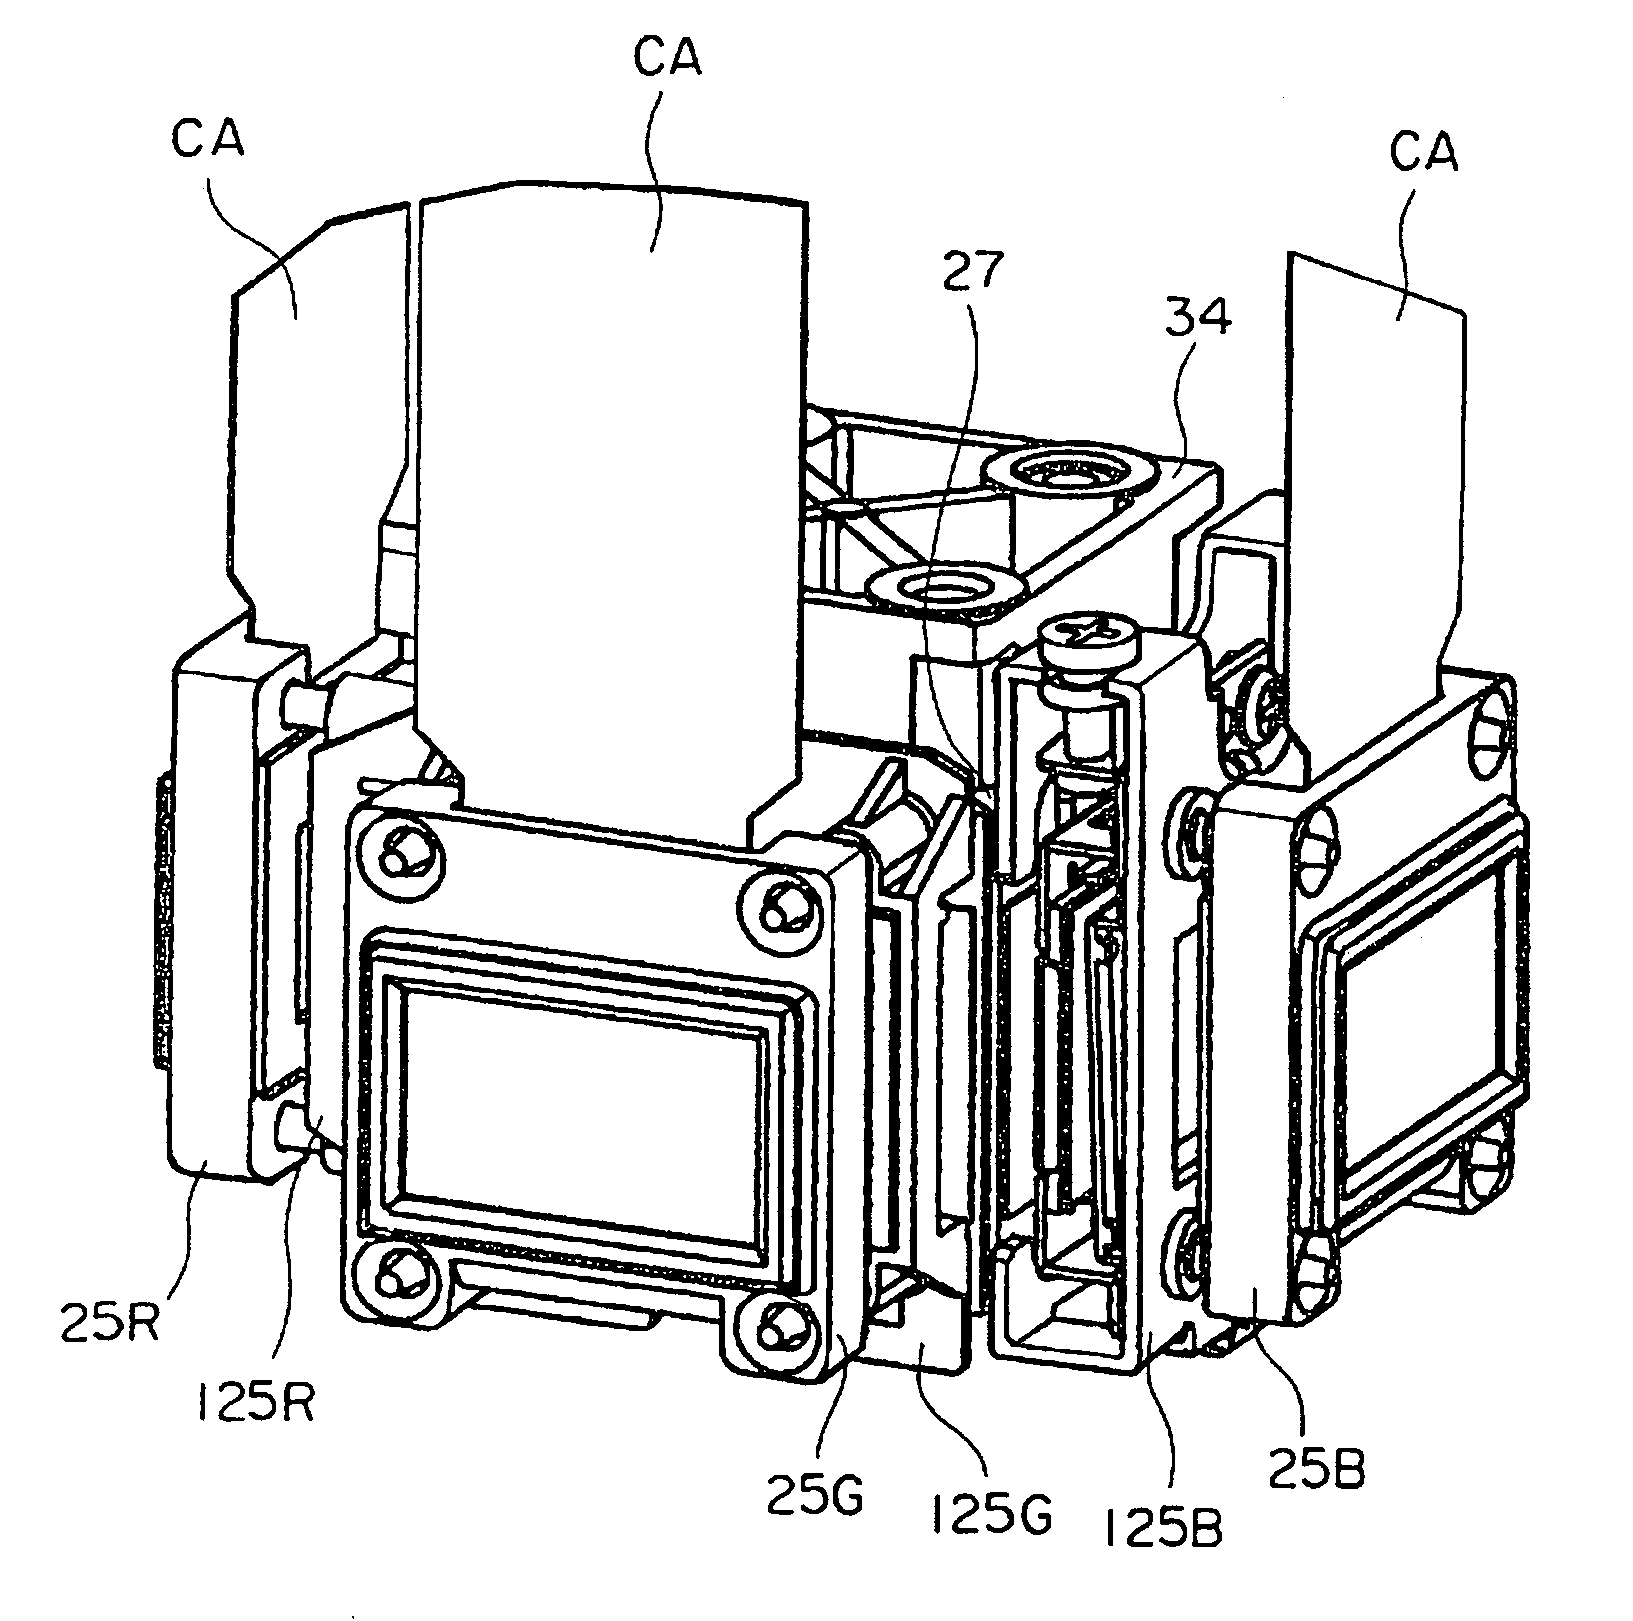 Optical assembly and projector